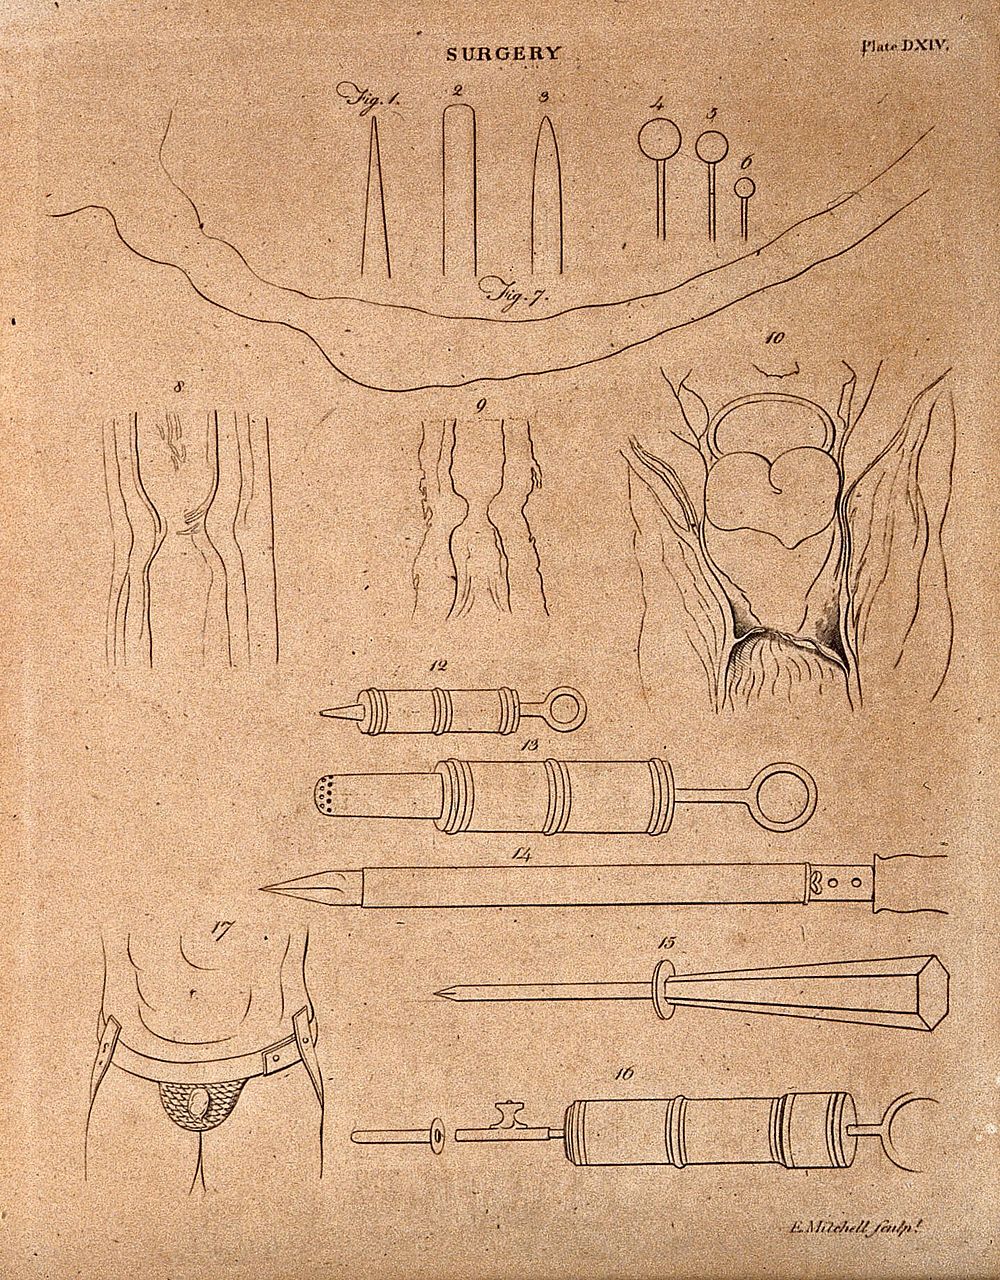 Surgical instruments, spatulas and syringes. Engraving by E. Mitchell.